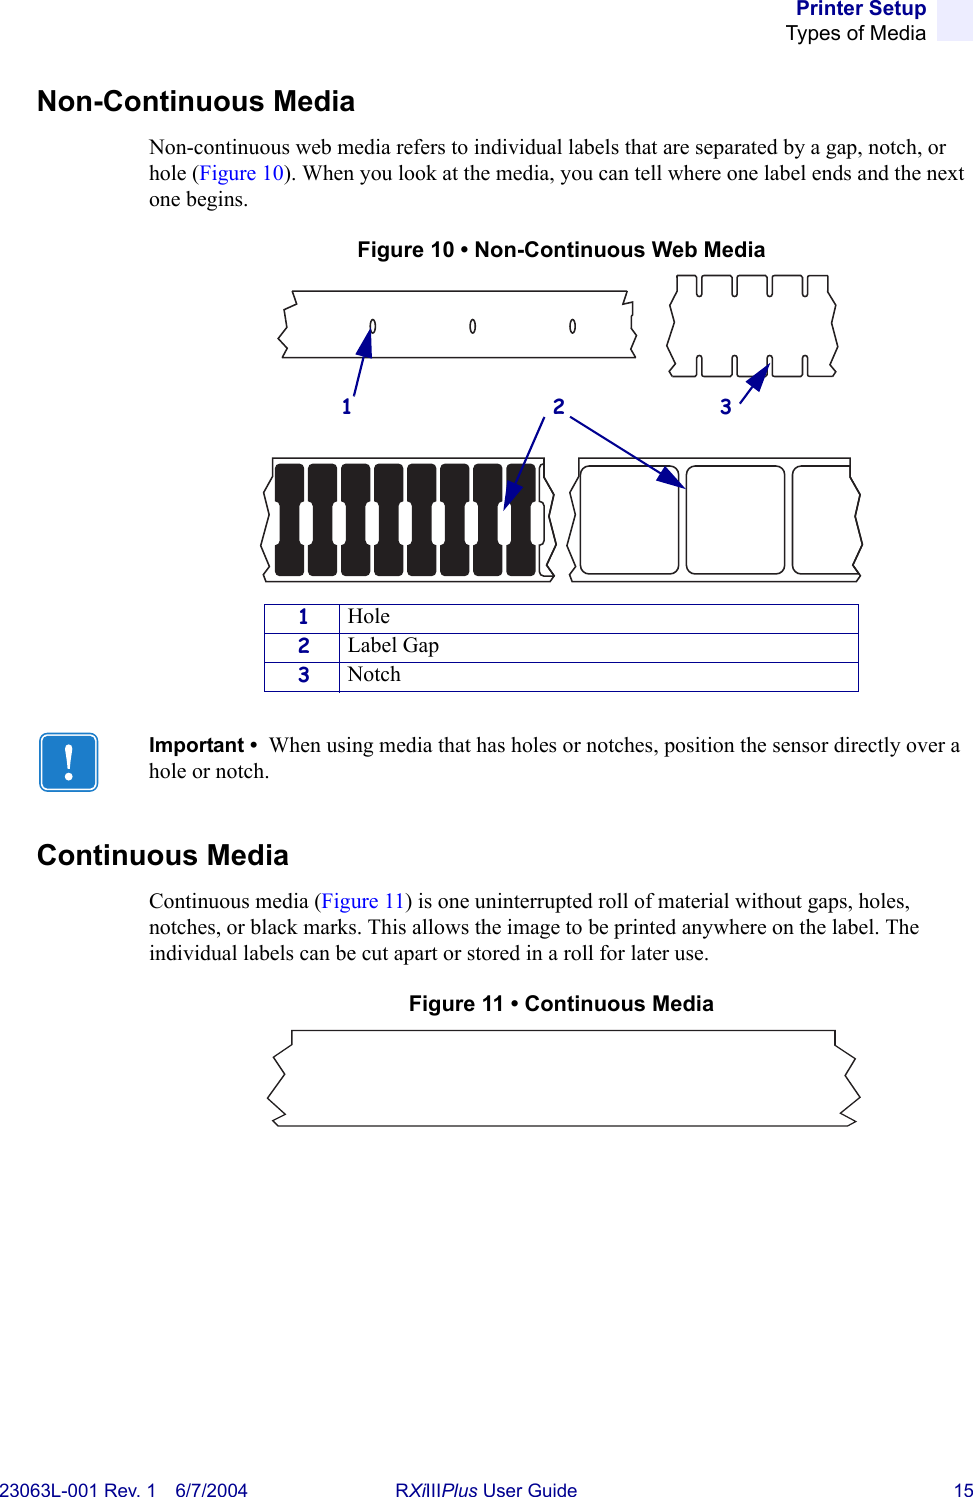 Printer SetupTypes of Media23063L-001 Rev. 1 6/7/2004 RXiIIIPlus User Guide 15Non-Continuous MediaNon-continuous web media refers to individual labels that are separated by a gap, notch, or hole (Figure 10). When you look at the media, you can tell where one label ends and the next one begins.Figure 10 • Non-Continuous Web MediaContinuous MediaContinuous media (Figure 11) is one uninterrupted roll of material without gaps, holes, notches, or black marks. This allows the image to be printed anywhere on the label. The individual labels can be cut apart or stored in a roll for later use.Figure 11 • Continuous Media1Hole2Label Gap3NotchImportant •  When using media that has holes or notches, position the sensor directly over a hole or notch.213